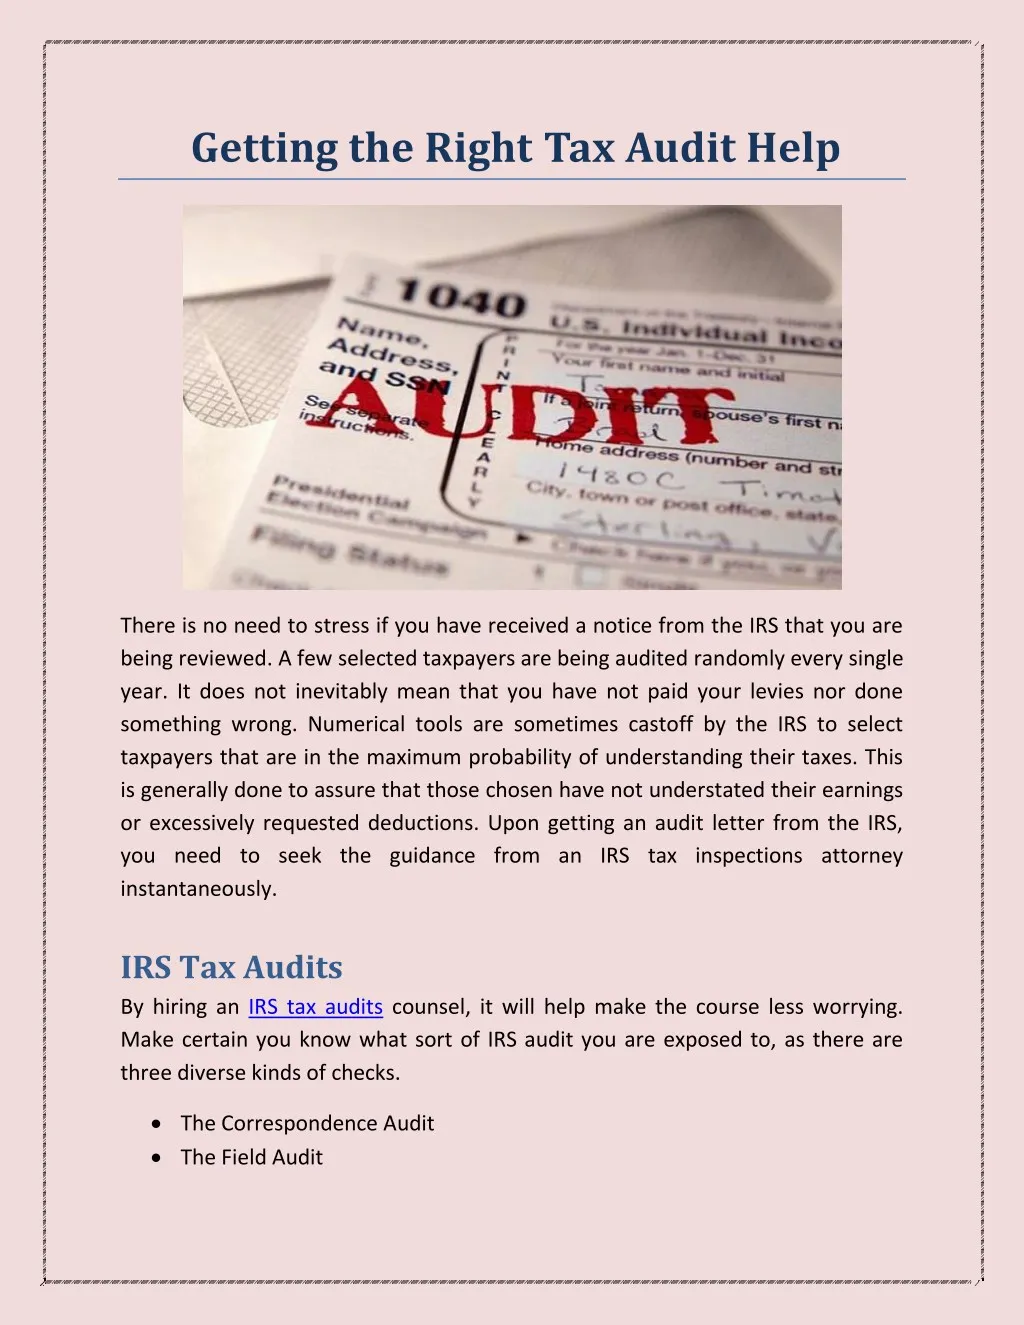 getting the right tax audit help